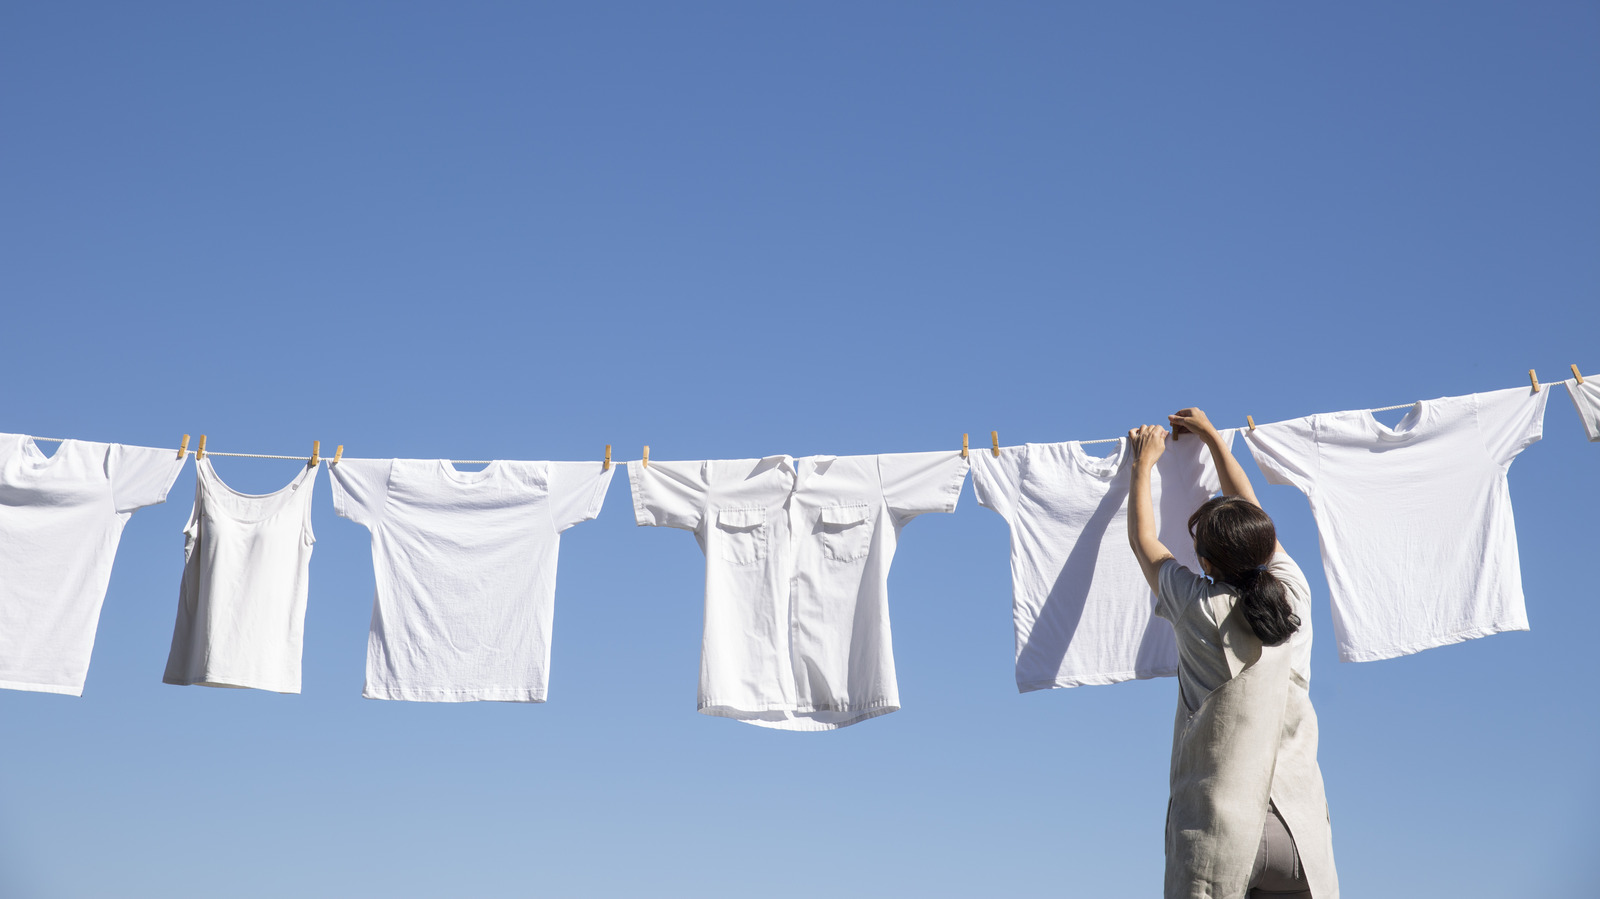 When hang-drying clothes, which is faster, indoors or outdoors